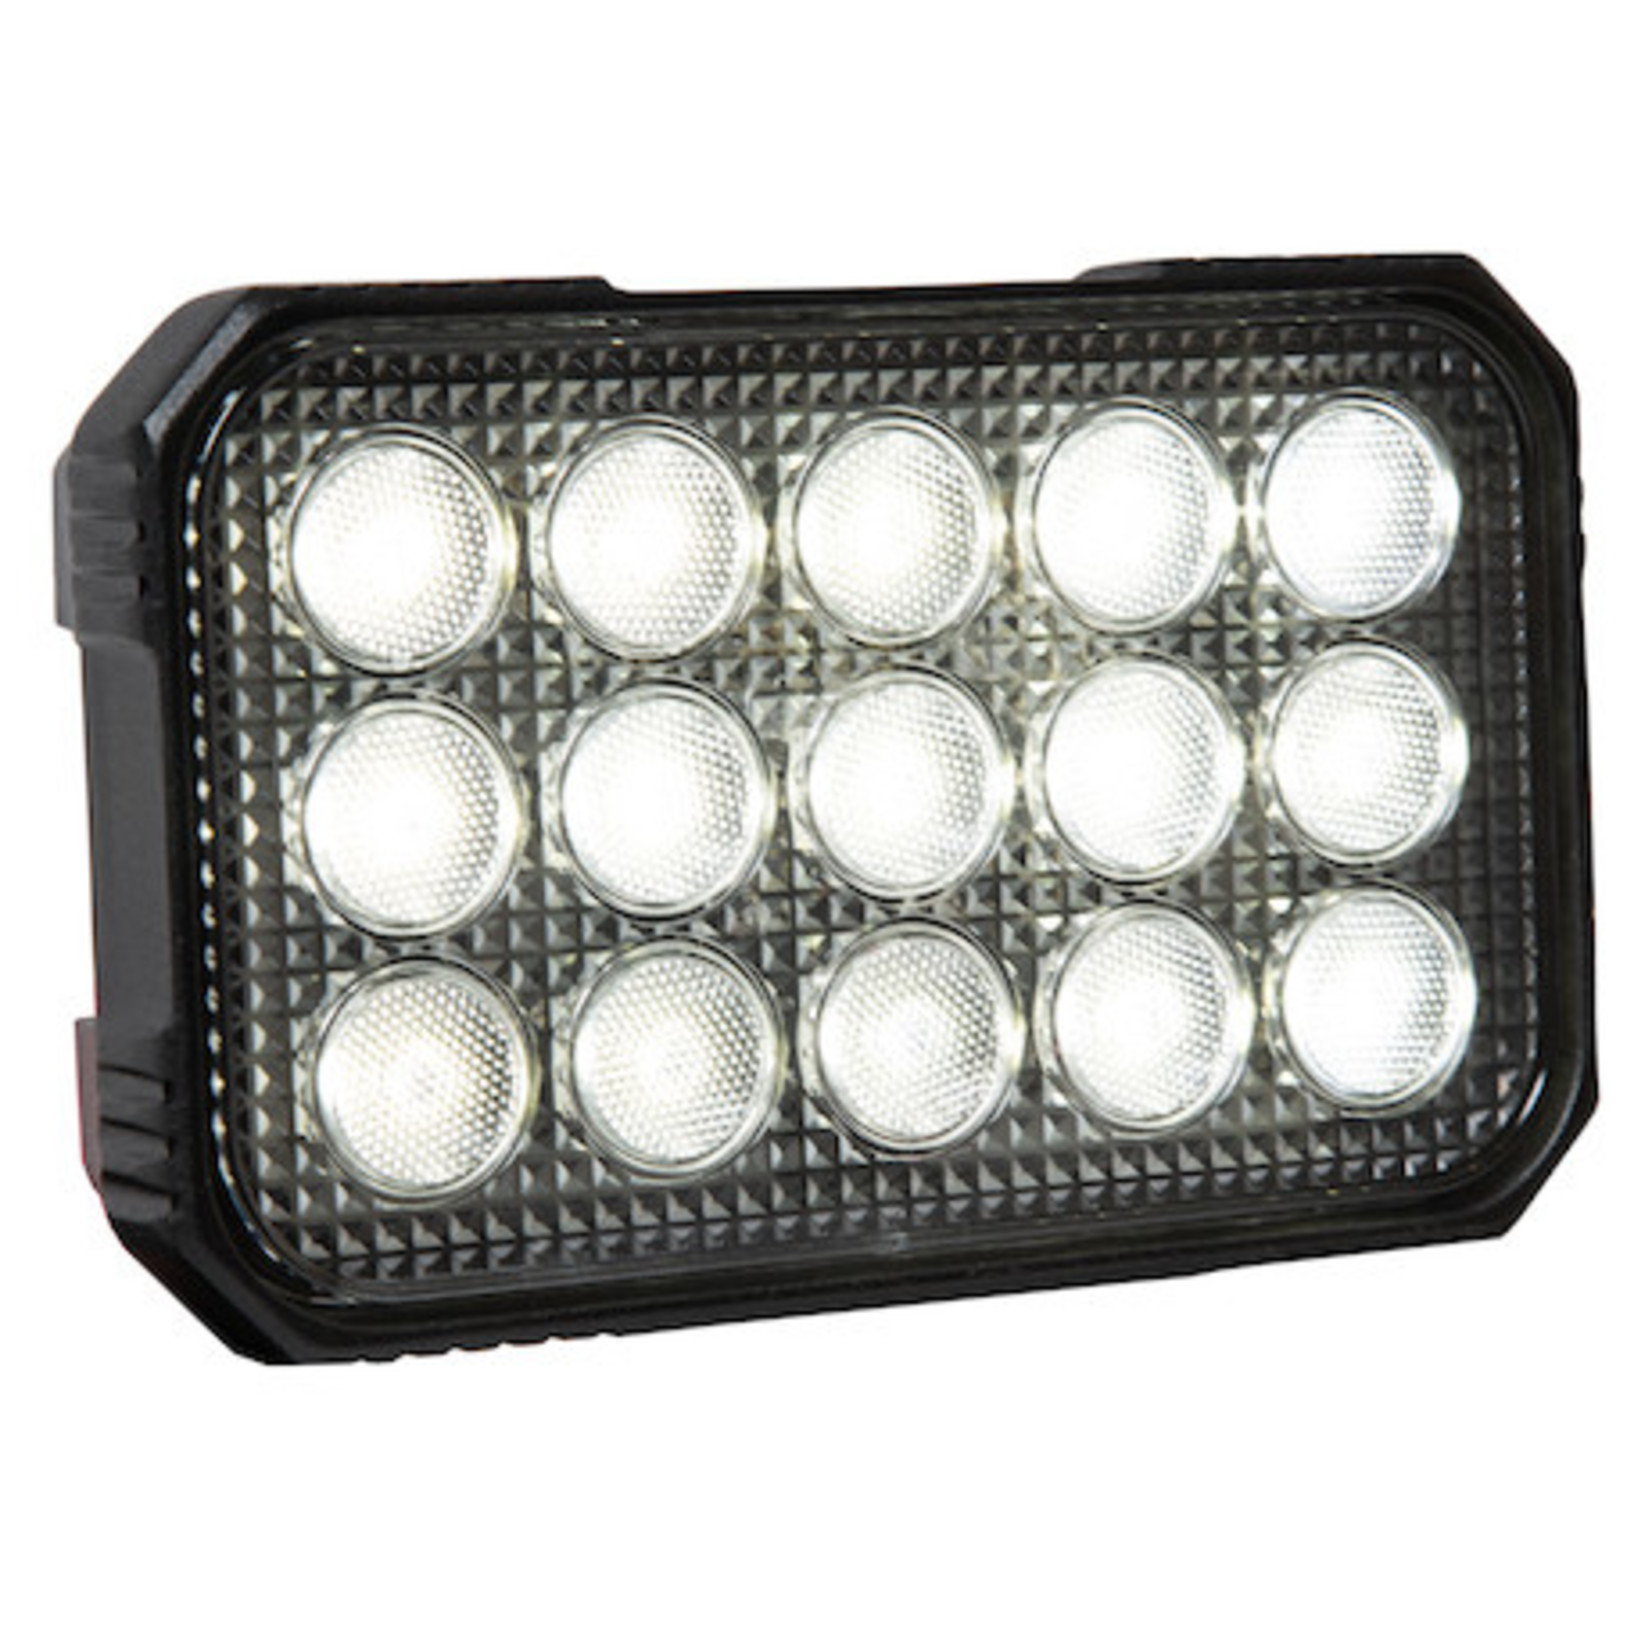 Buyers Products Company Ultra Bright 6 Inch Wide Rectangular LED Flood Light